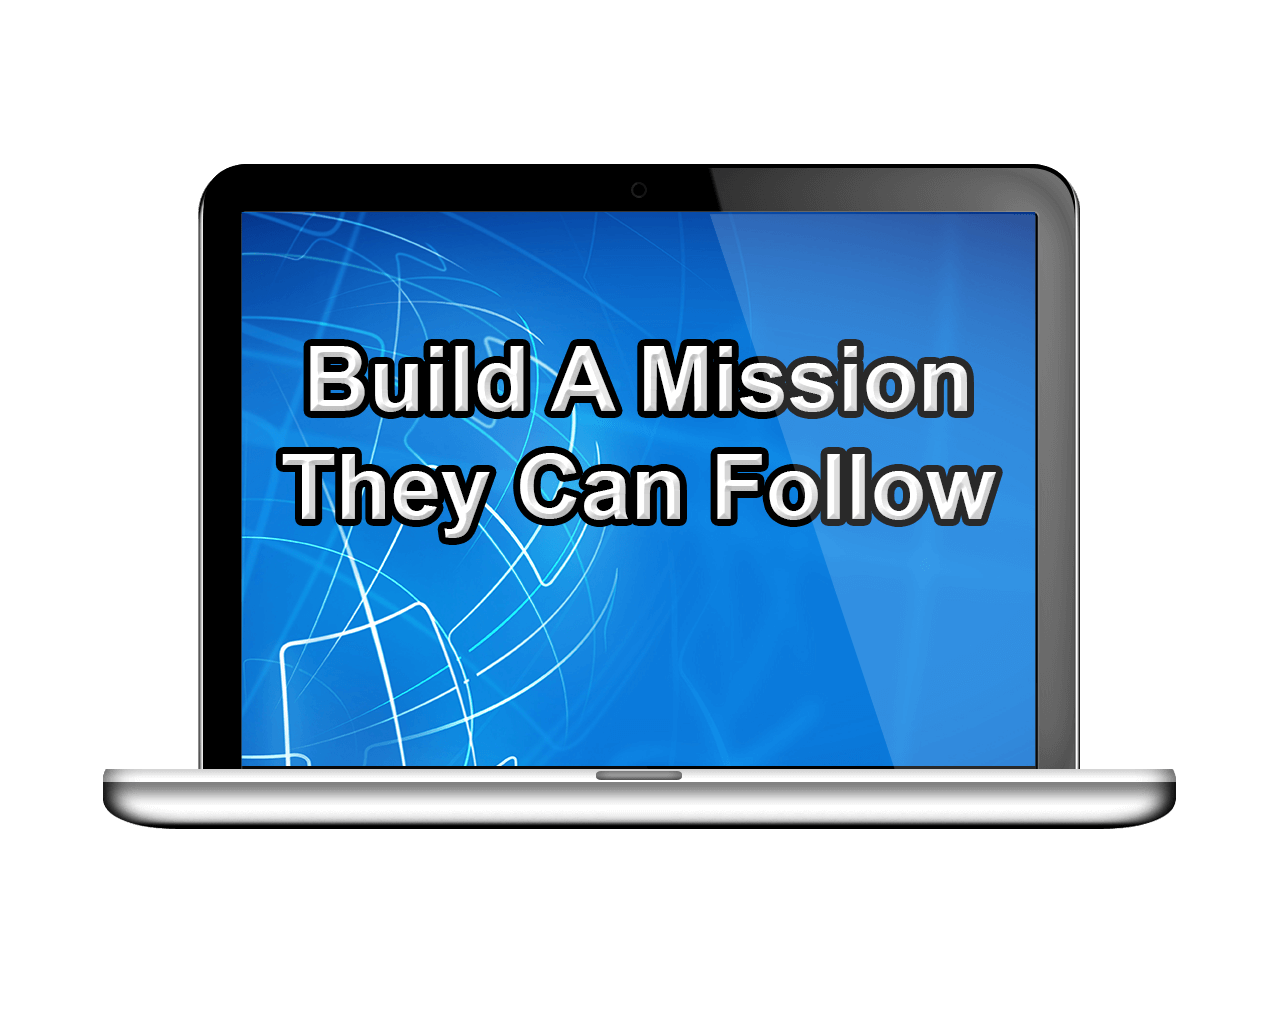 Build A Mission They Can Follow Image